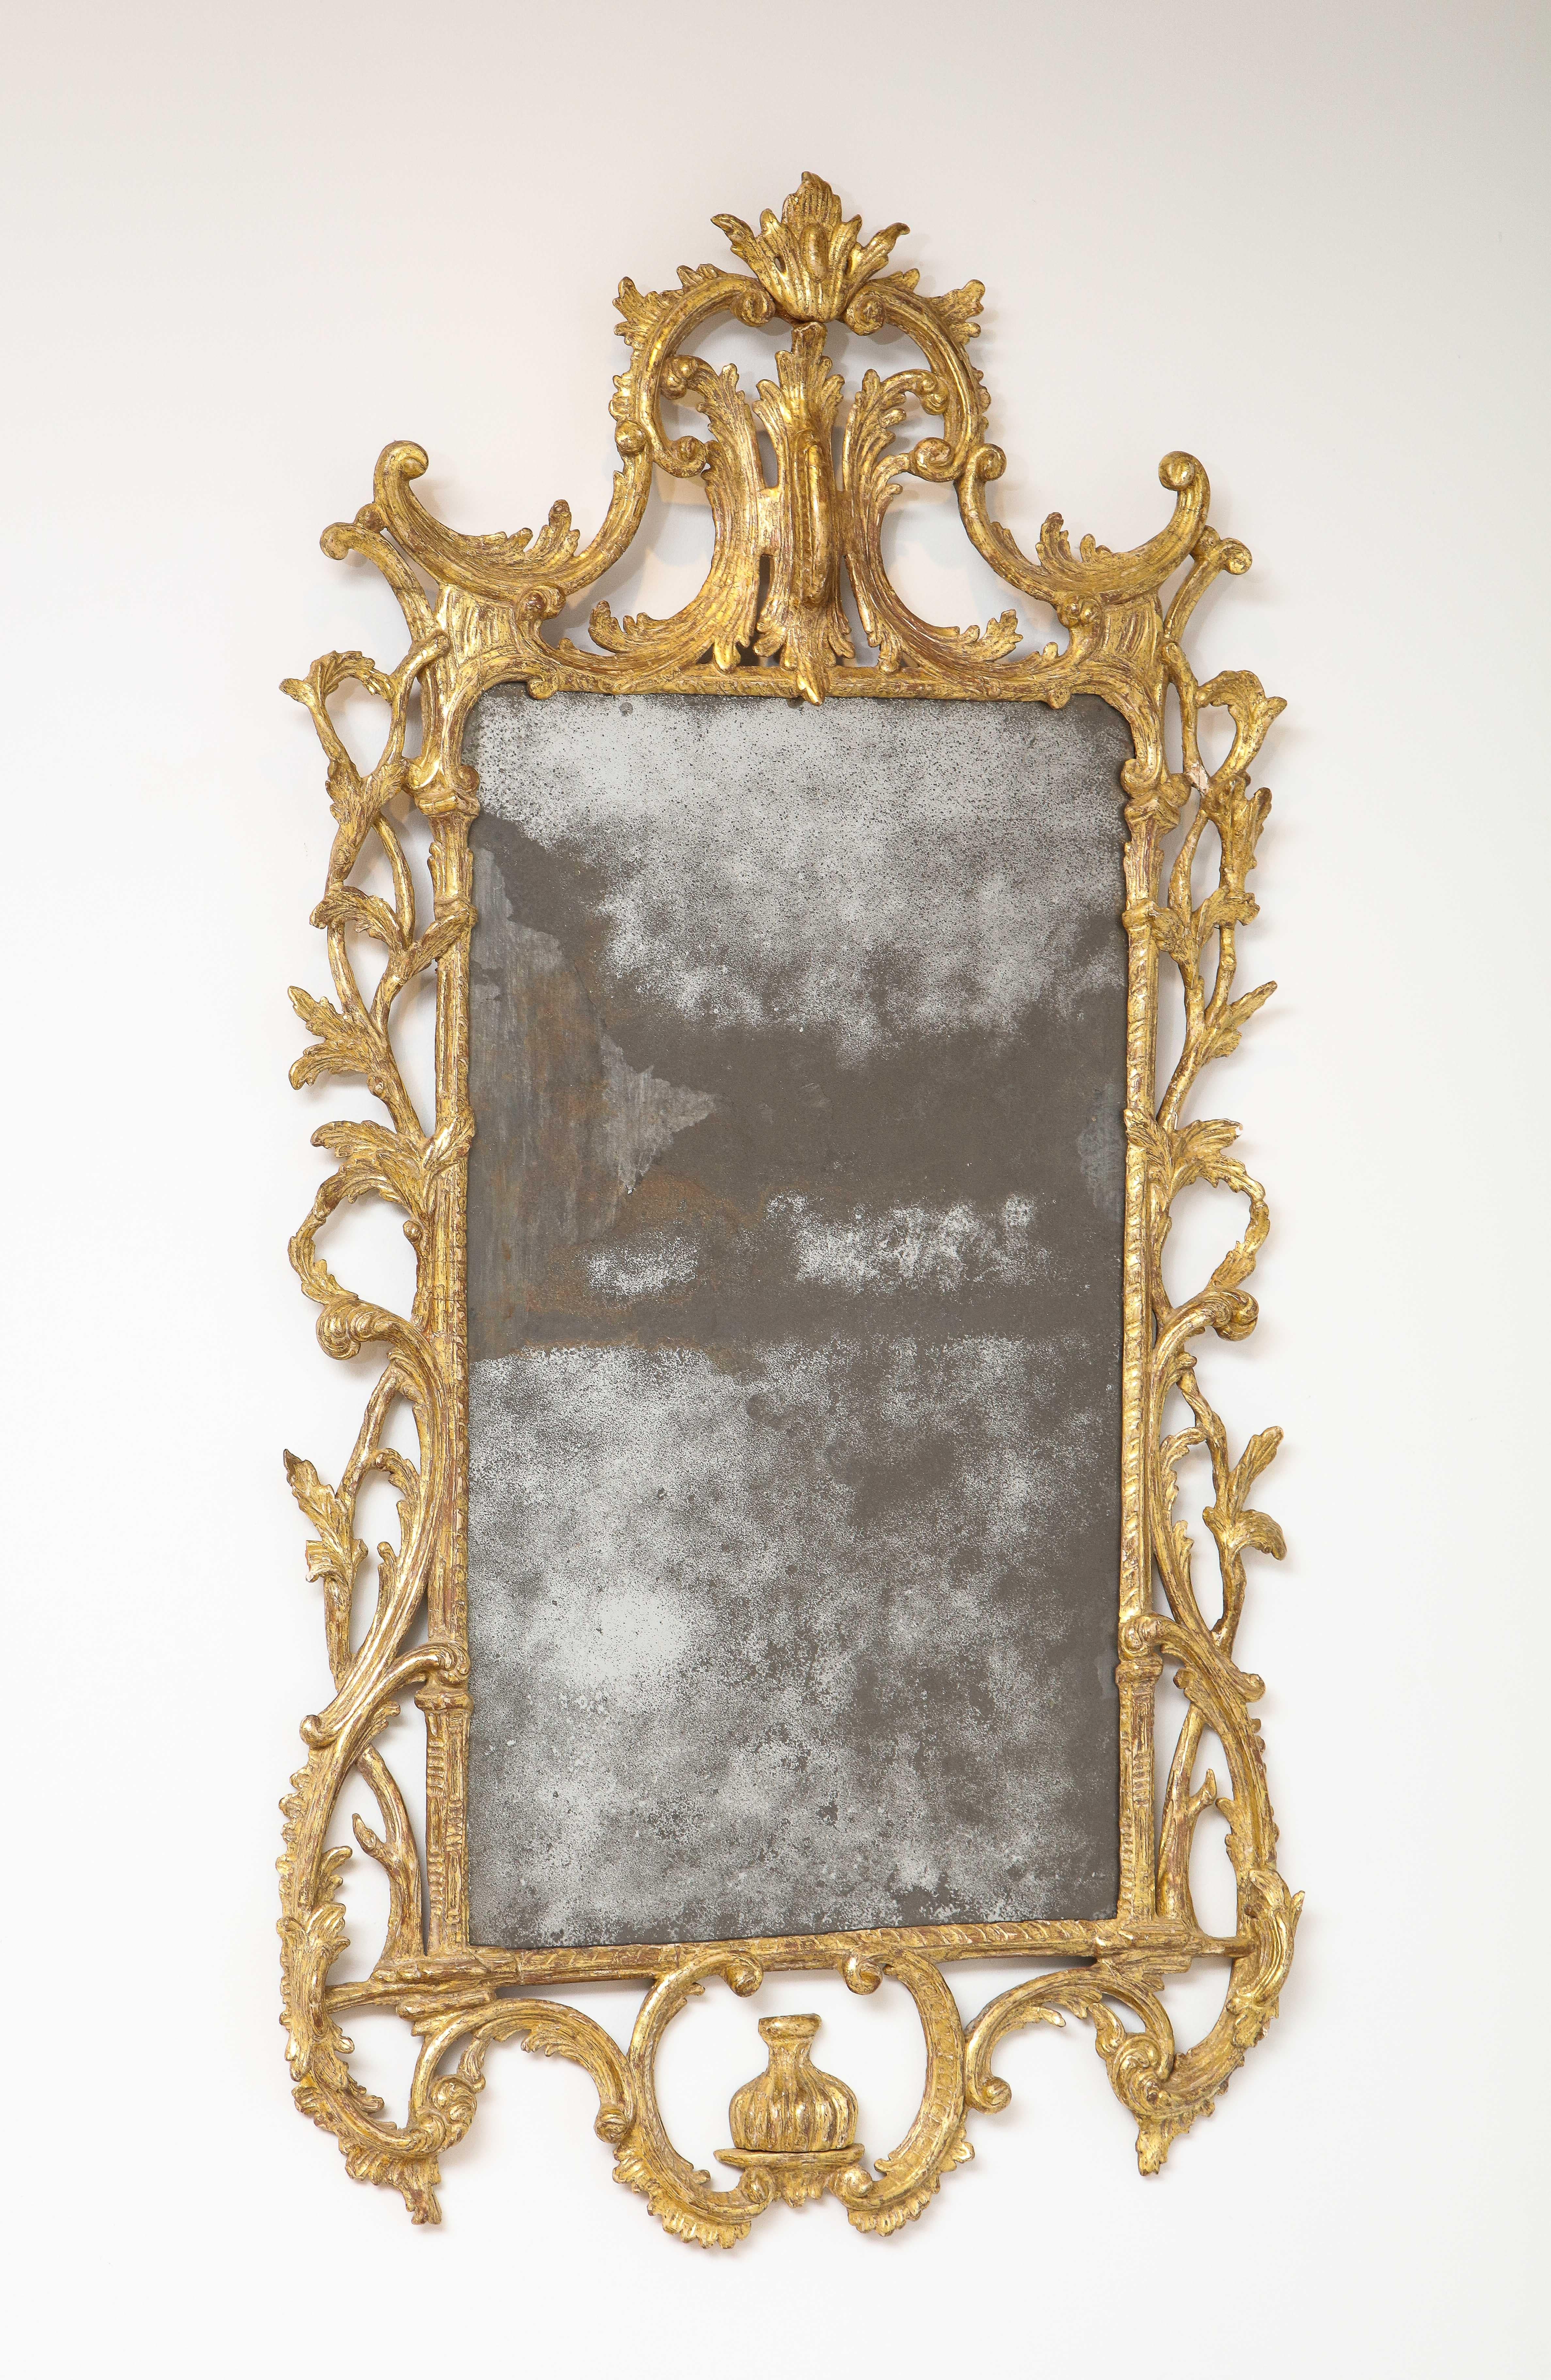 Fine George III period giltwood looking glass, retaining its original mercury plate, having lovely dry scraped original gilding on a foliate and rocaille carved frame, the whole with pleasing old surface.
 